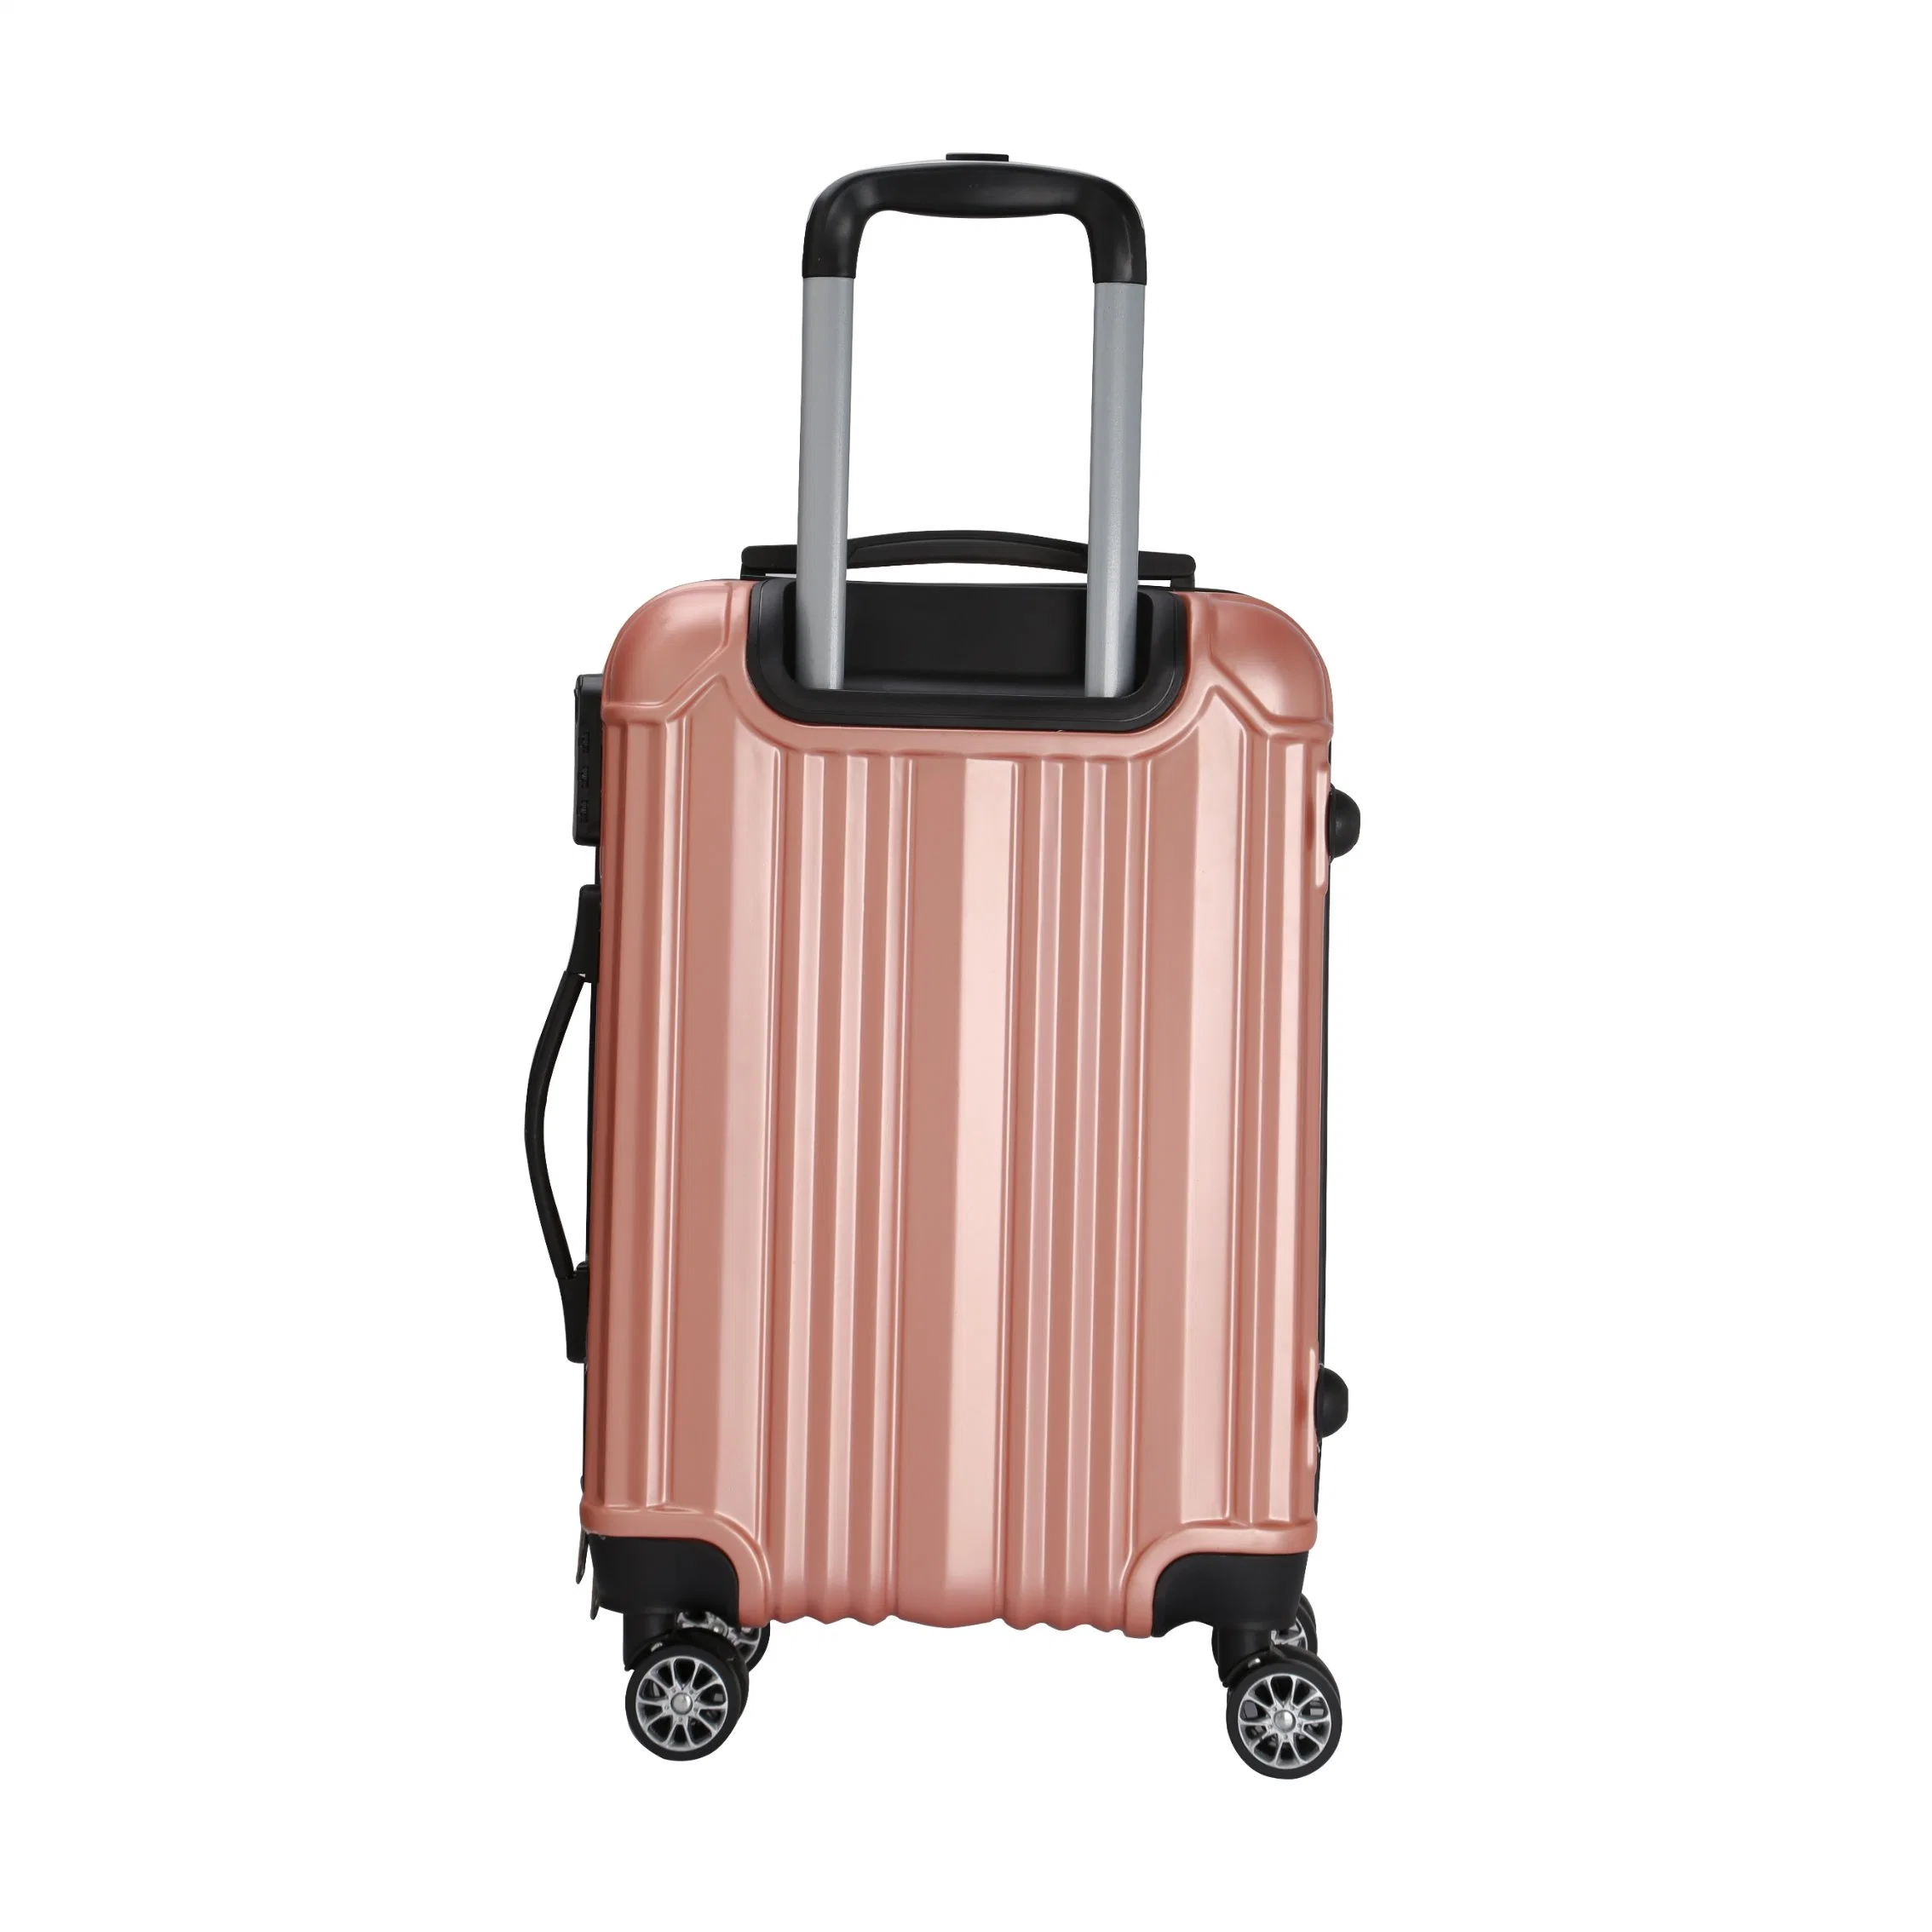 OEM Carry on PC Travelling Suitcase Luggage Bags Trolley Cases Xhp076